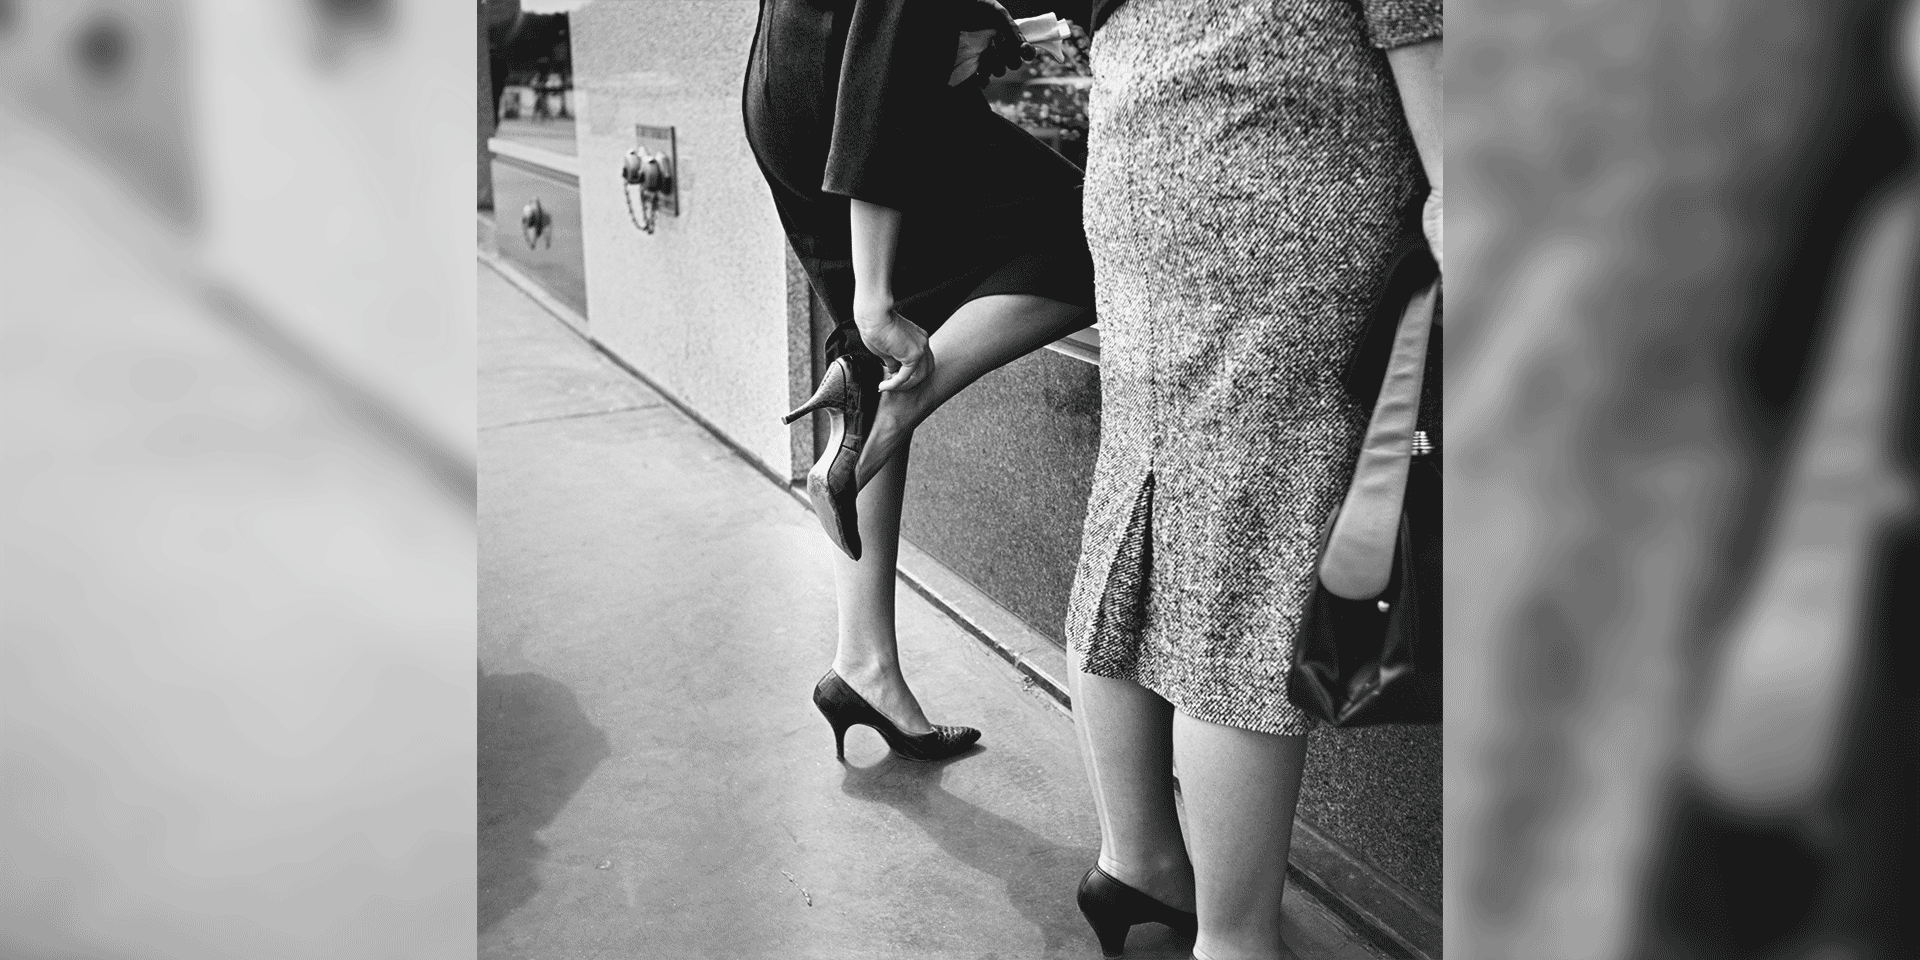 Sans lieu, septembre 1961 Tirage argentique, 2020 ©Estate of Vivian Maier, Courtesy of Maloof Collection and Howard Greenberg Gallery, NY